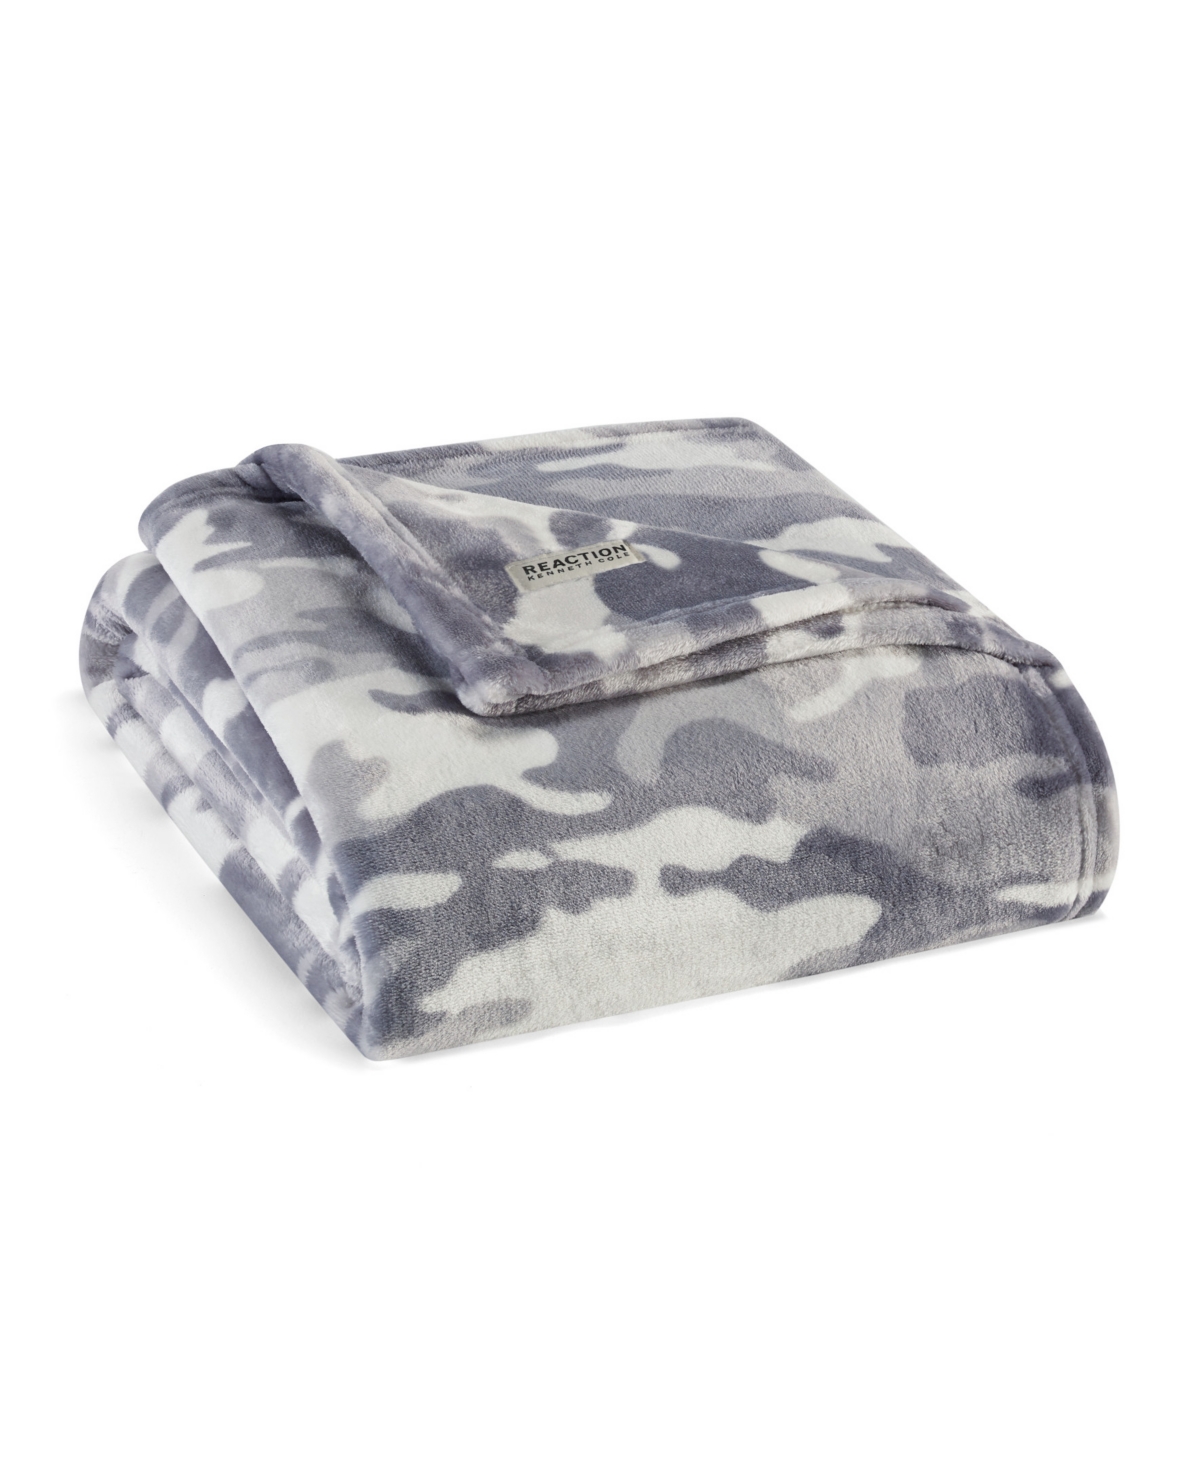 KENNETH COLE REACTION BLEND OUT CAMOUFLAGE ULTRA SOFT PLUSH THROW BEDDING